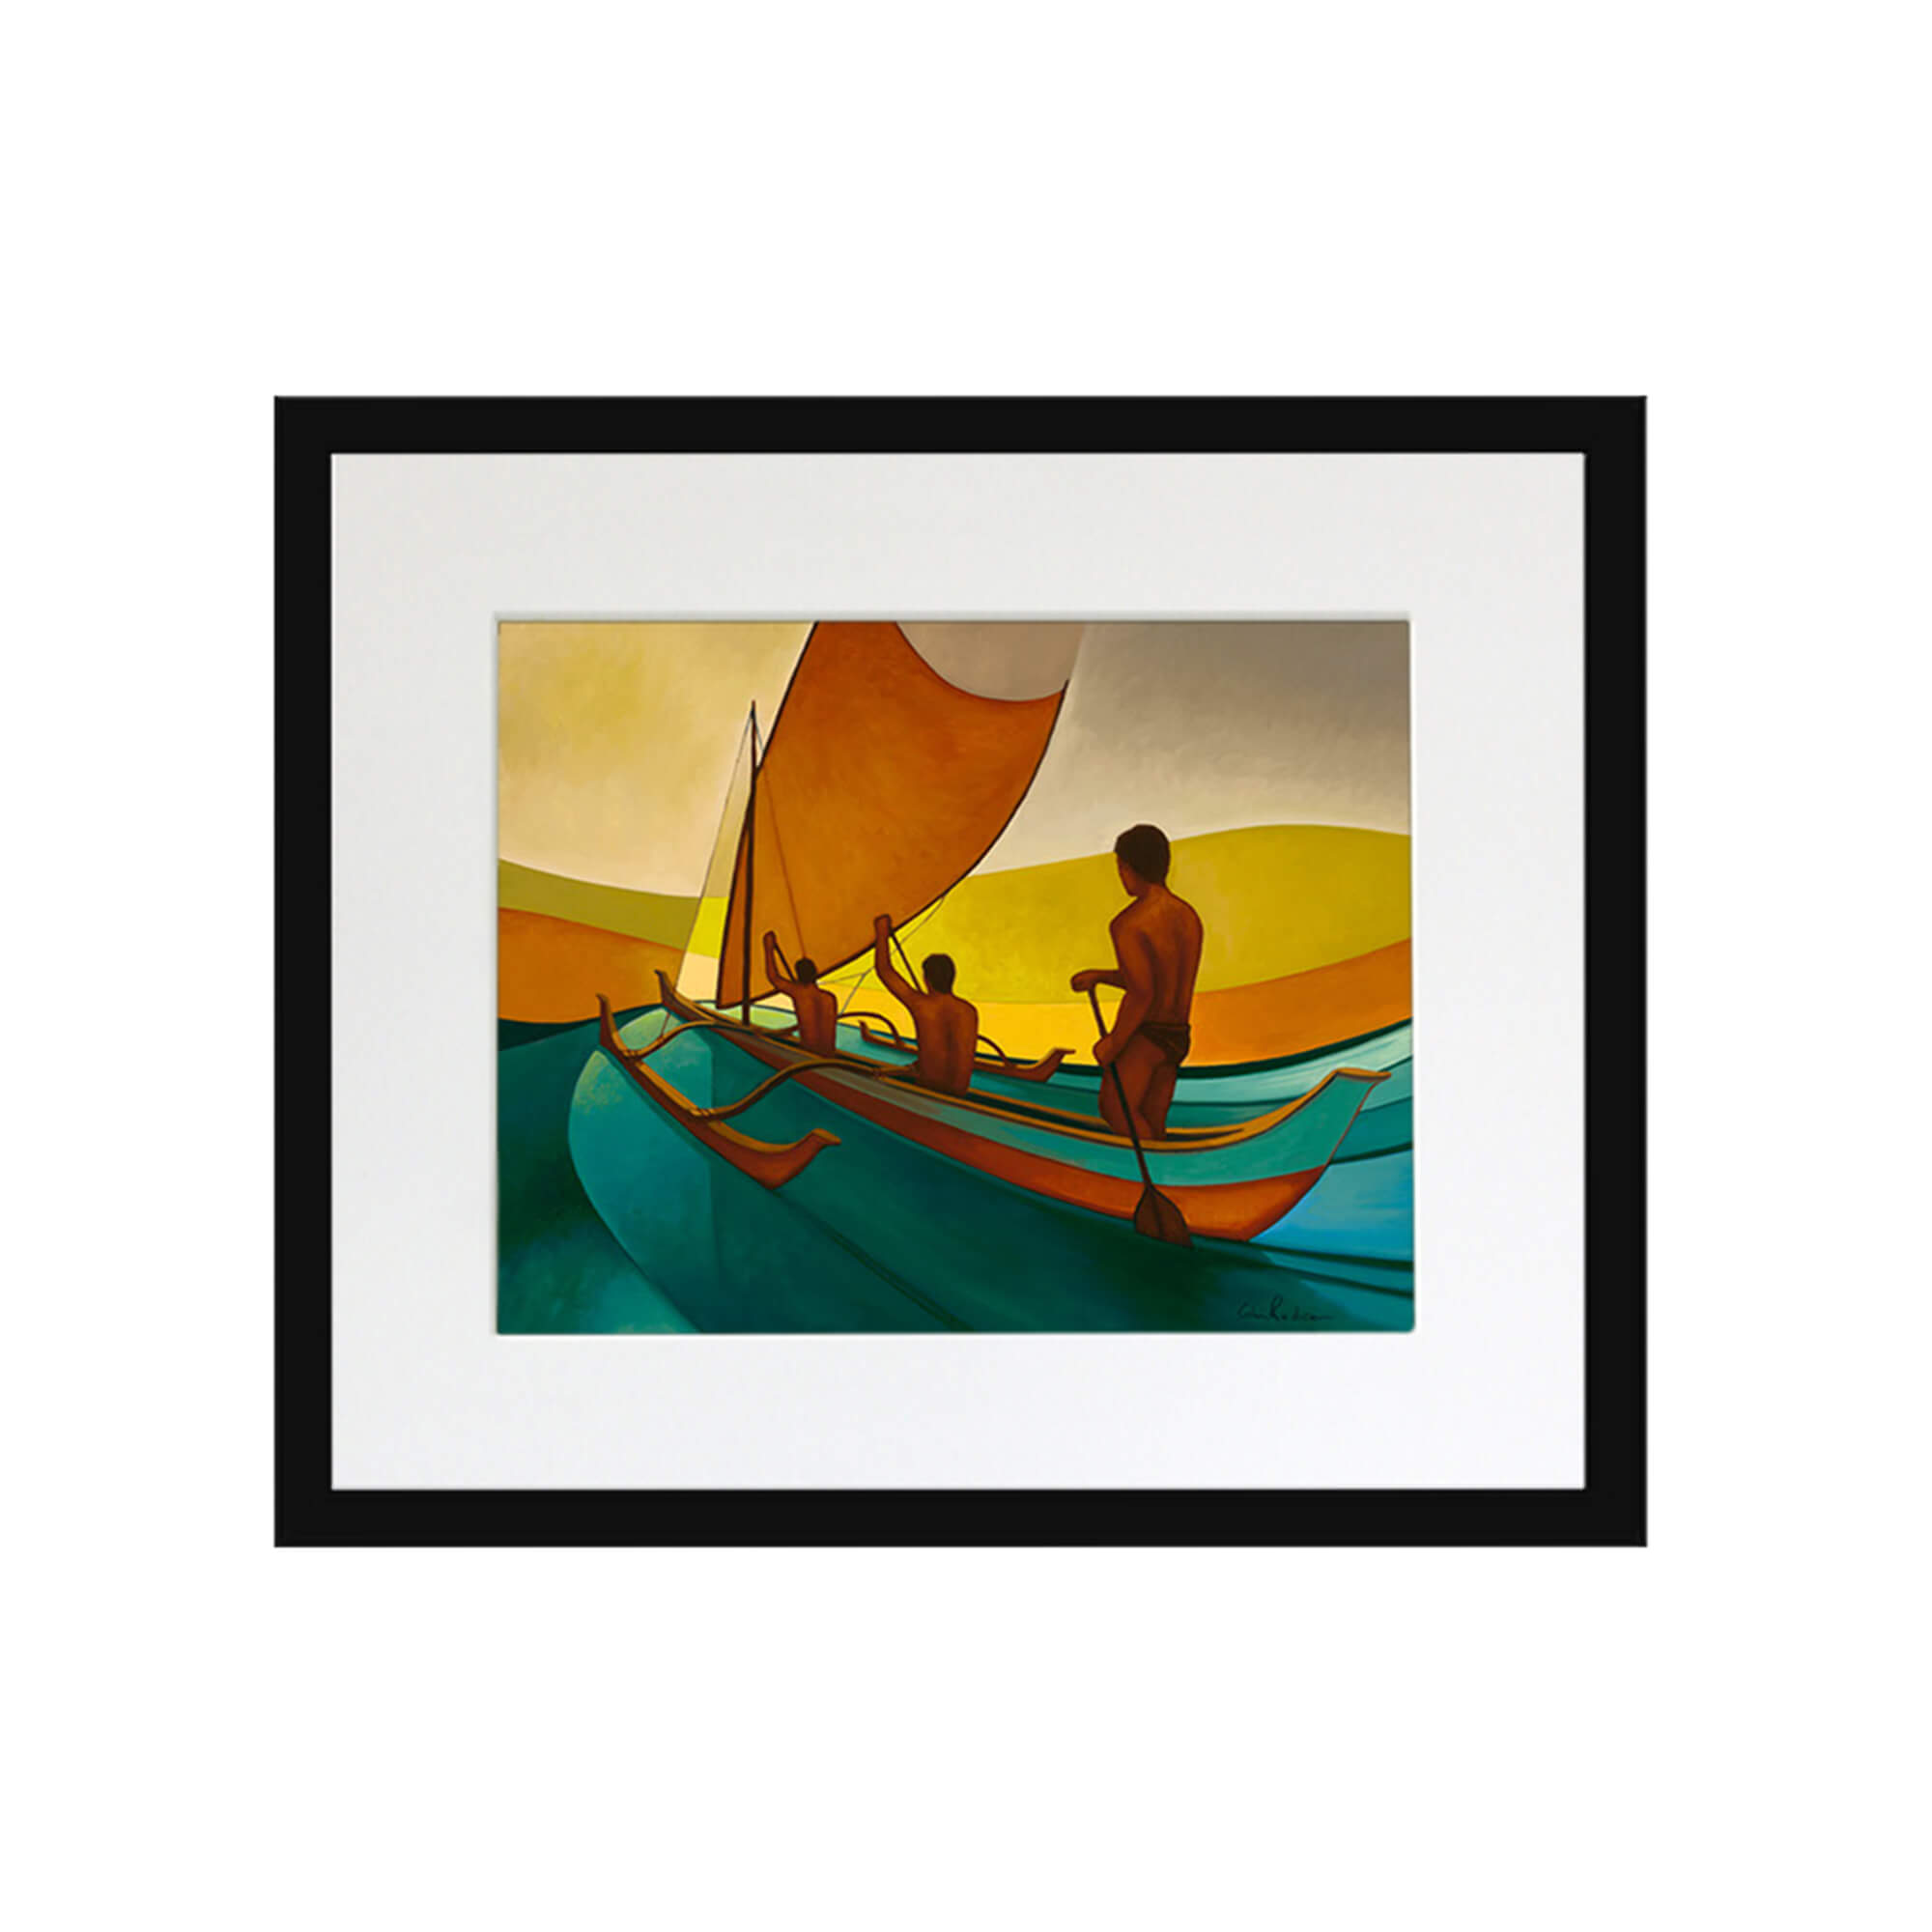 Men in a boat towards the horizon by Hawaii artist Colin Redican